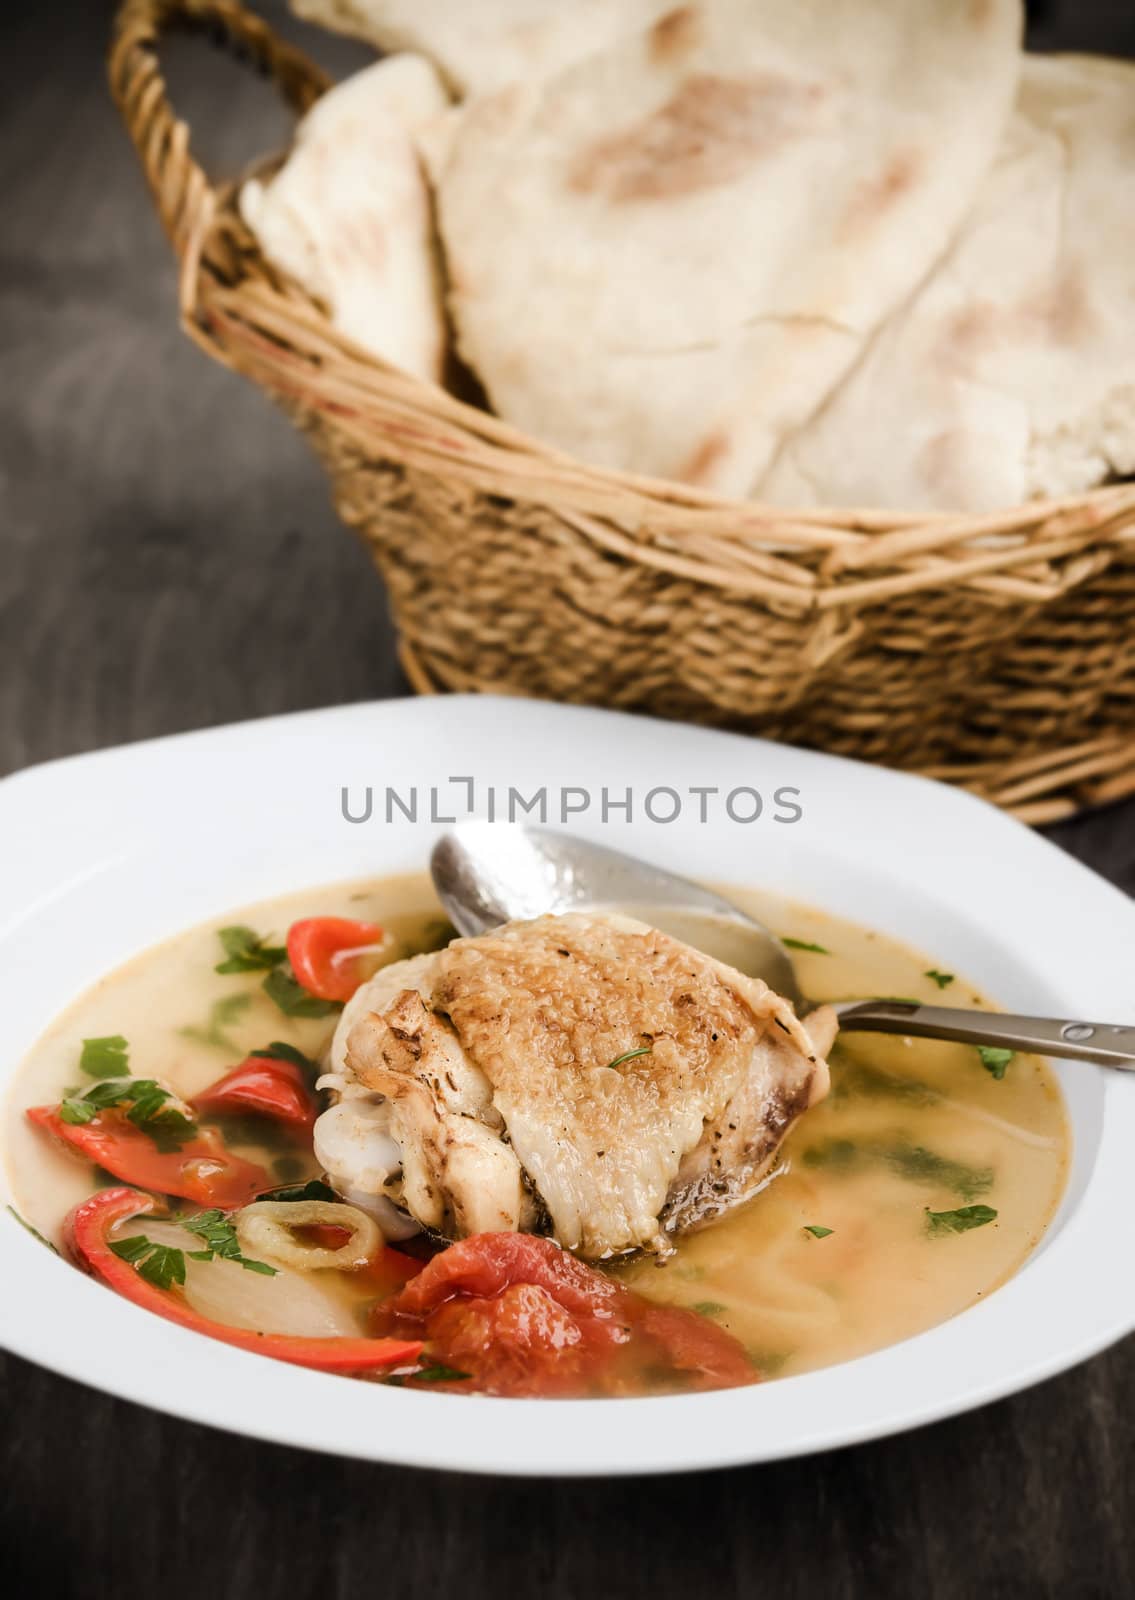 Chicken sour soup with homemade bread on rustic background